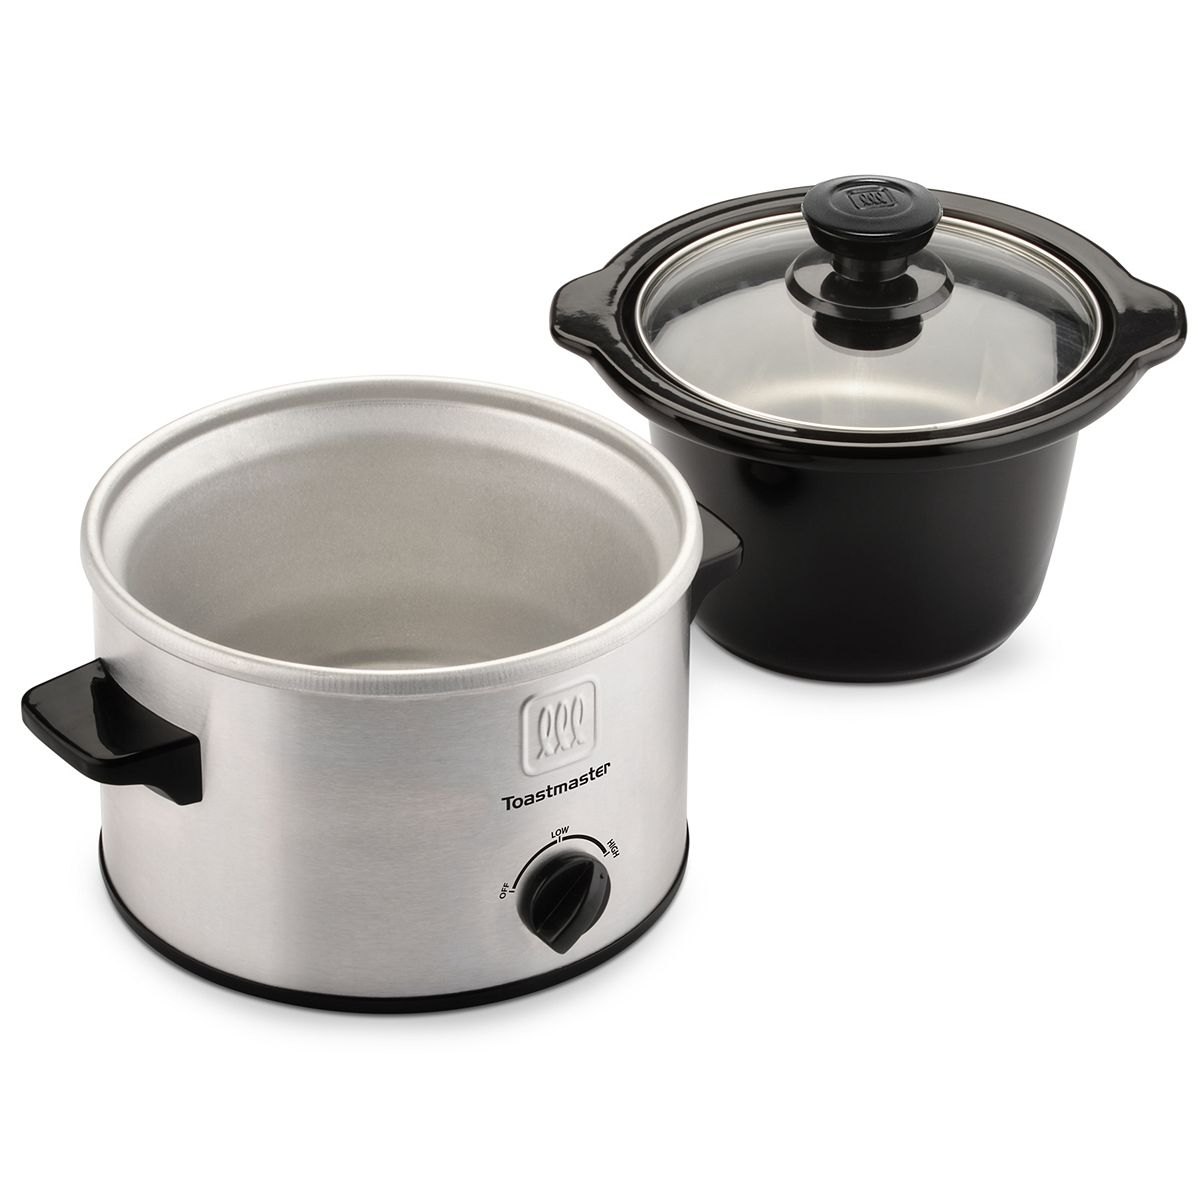 Toastmaster 1.5-qt. Stainless Steel Slow Cooker $10.39